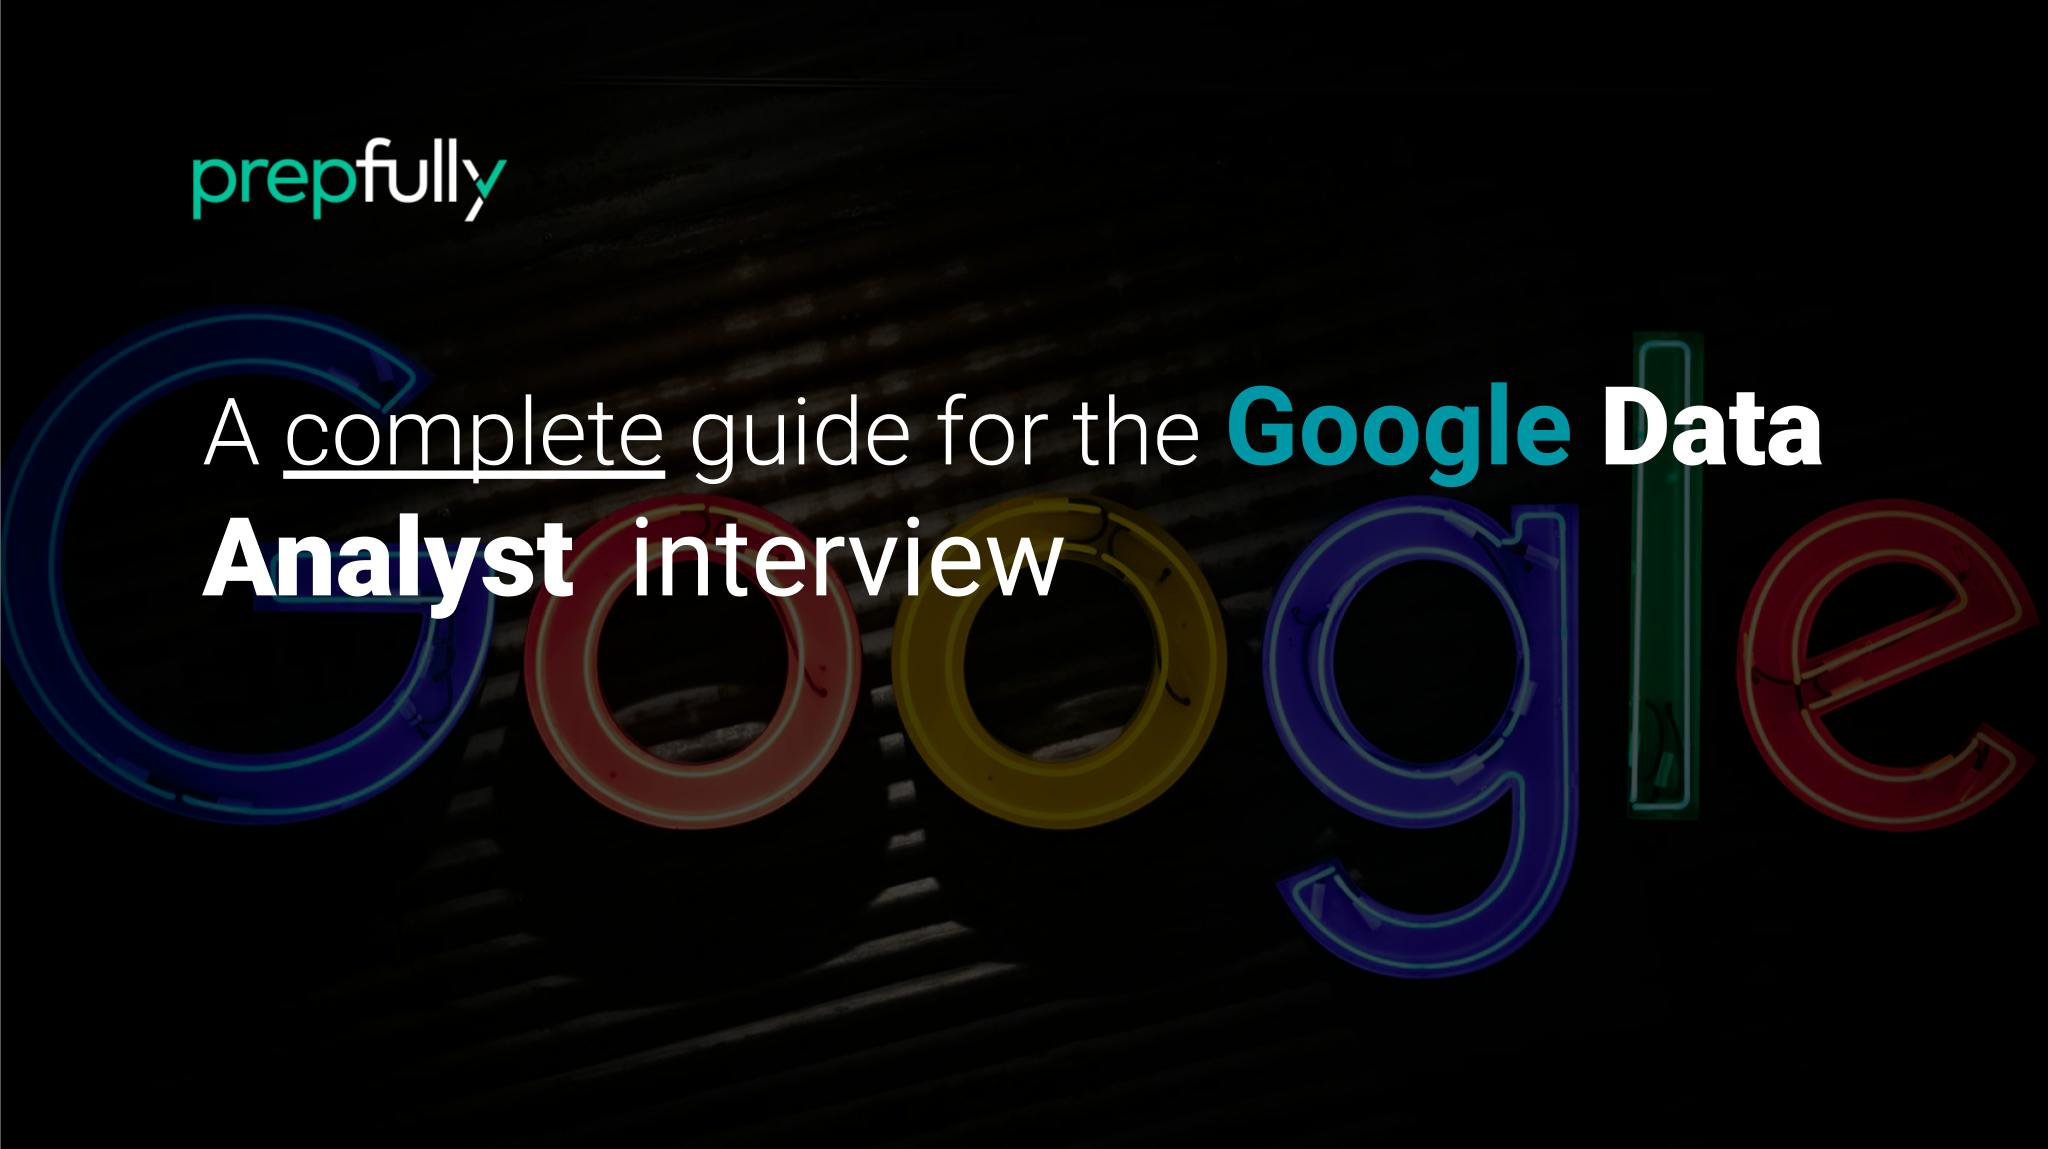 Interview guide for Google Data Analyst